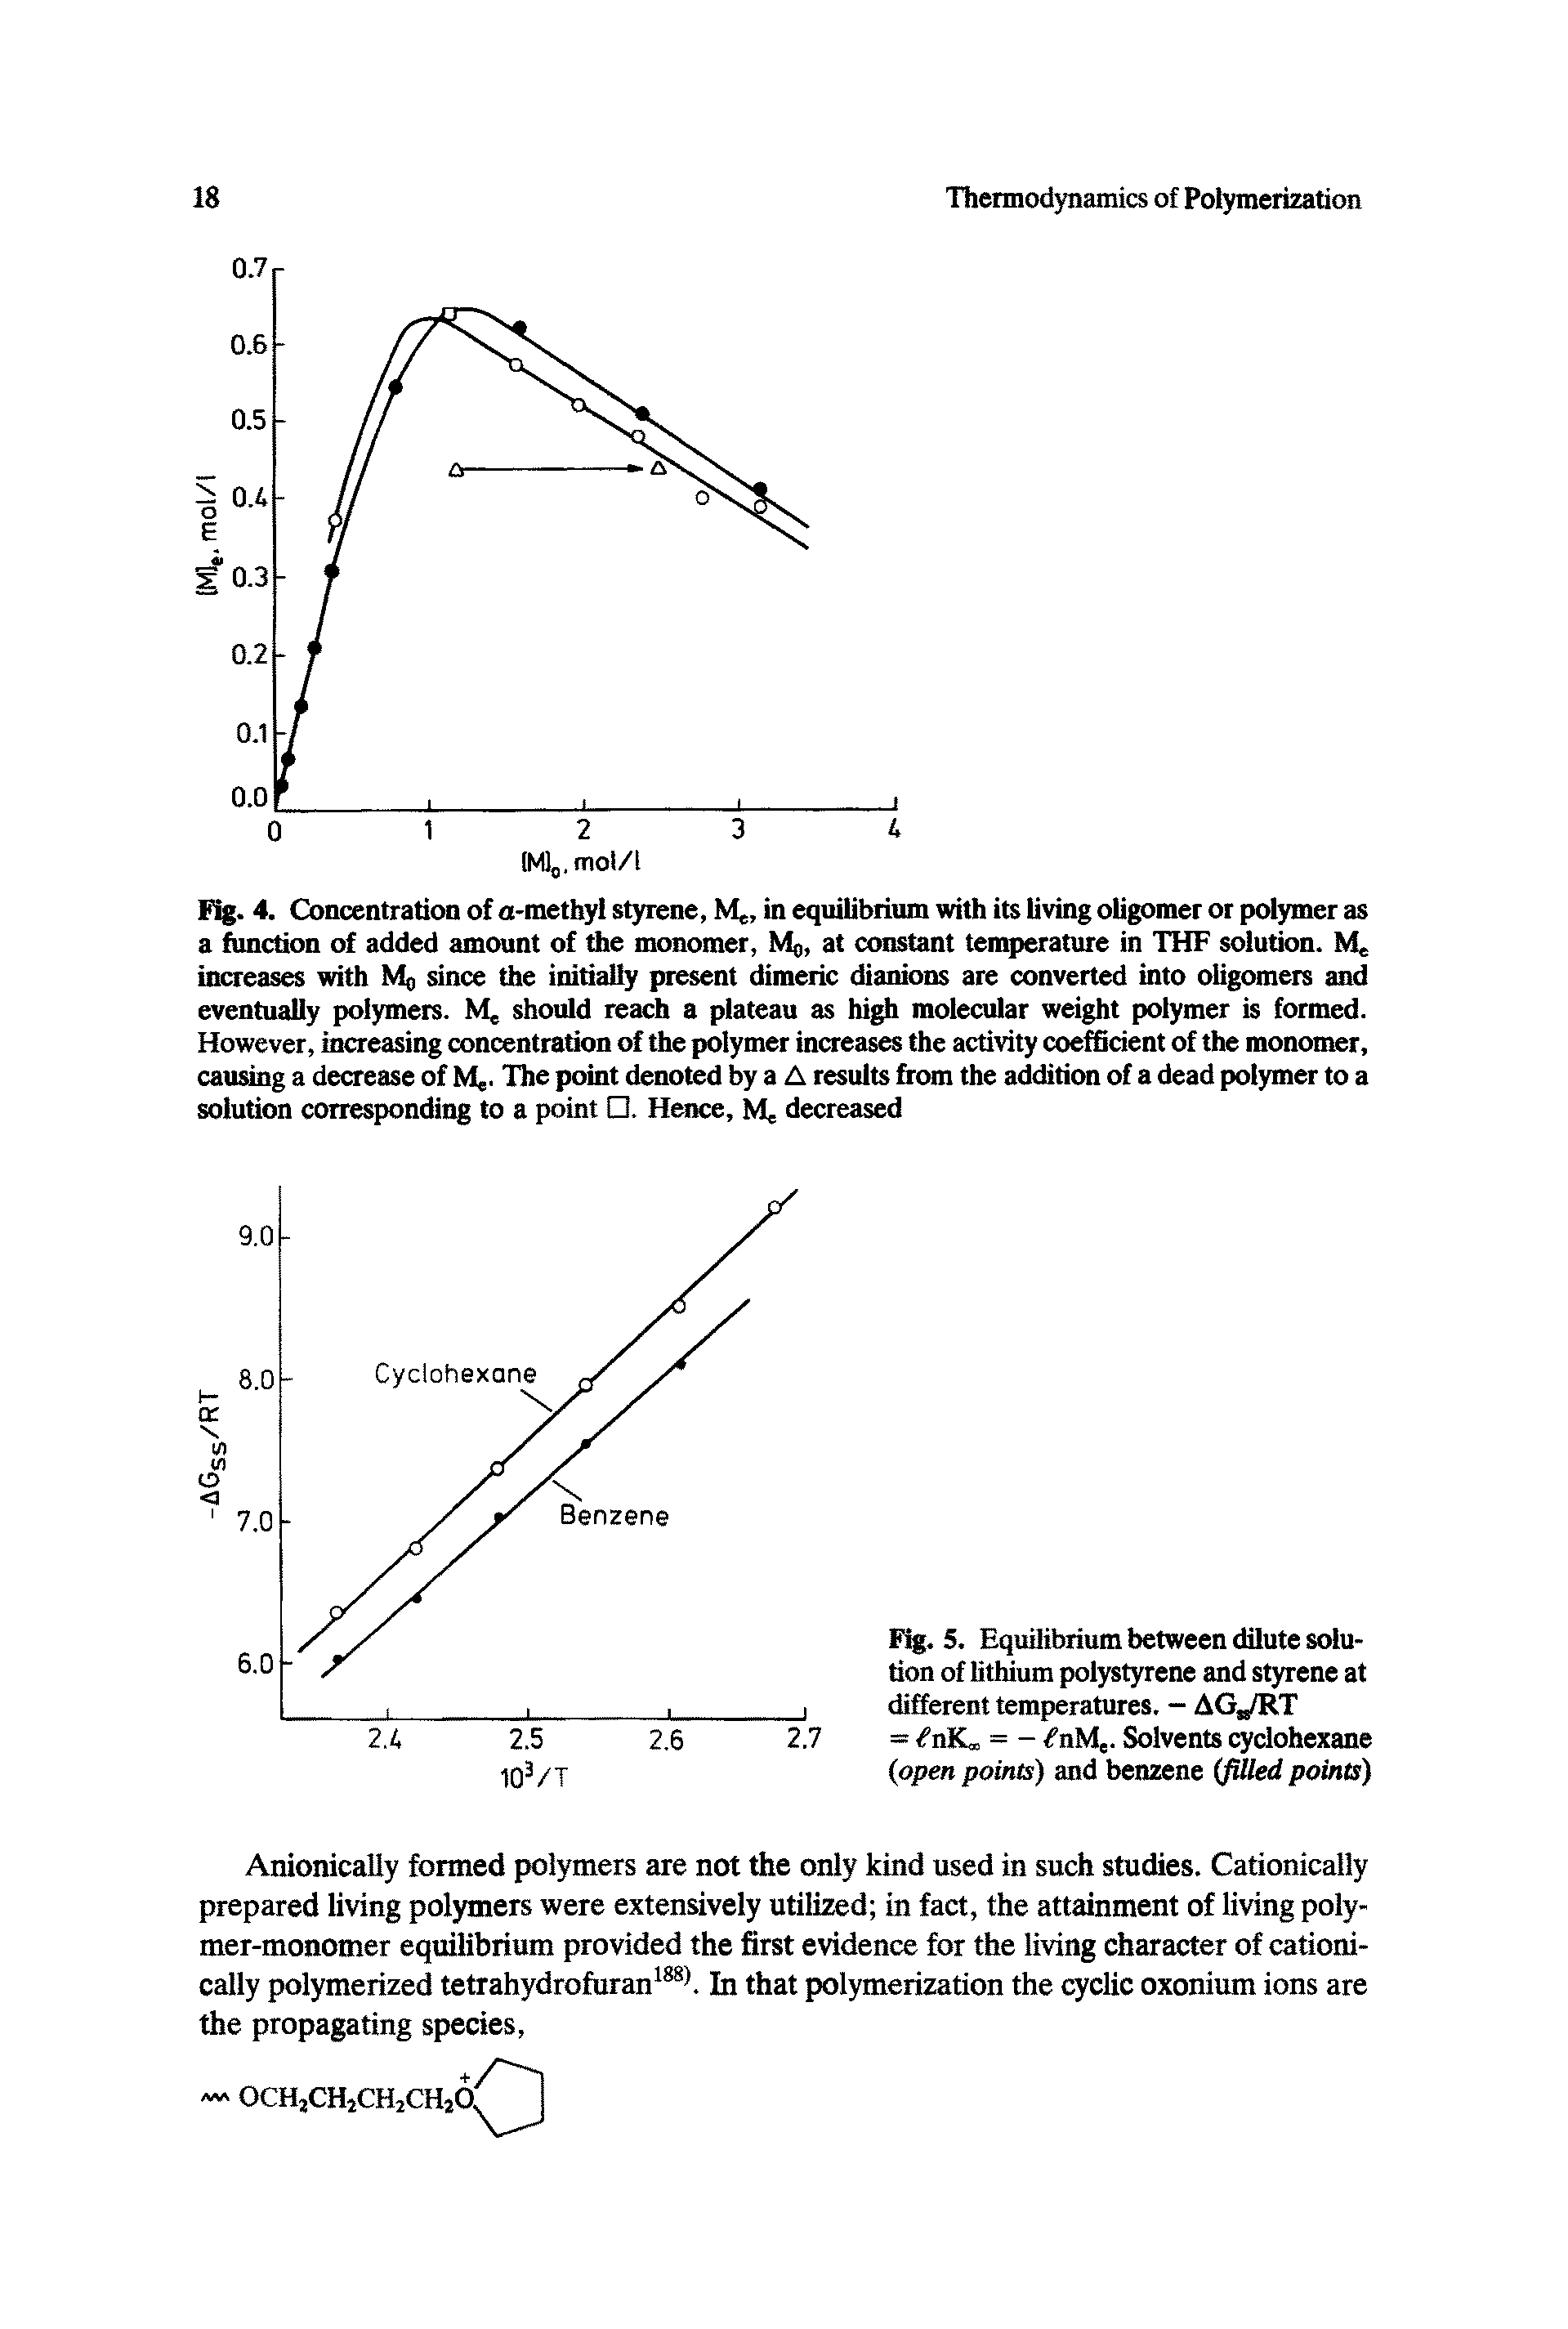 Fig. 4. Concentration of a-methyl styrene, Me, in equilibrium with its living oligomer or polymer as a function of added amount of the monomer, Mo, at constant temperature in THF solution. increases with Mo since the initially present dimeric dianions are converted into oligomers and eventually polymers. Me should reach a plateau as high molecular weight polymer is formed. However, increasing concentration of the polymer increases the activity coefficient of the monomer, causing a decrease of M,. The point denoted by a A results from the addition of a dead polymer to a solution corresponding to a point . Hence, M decreased...